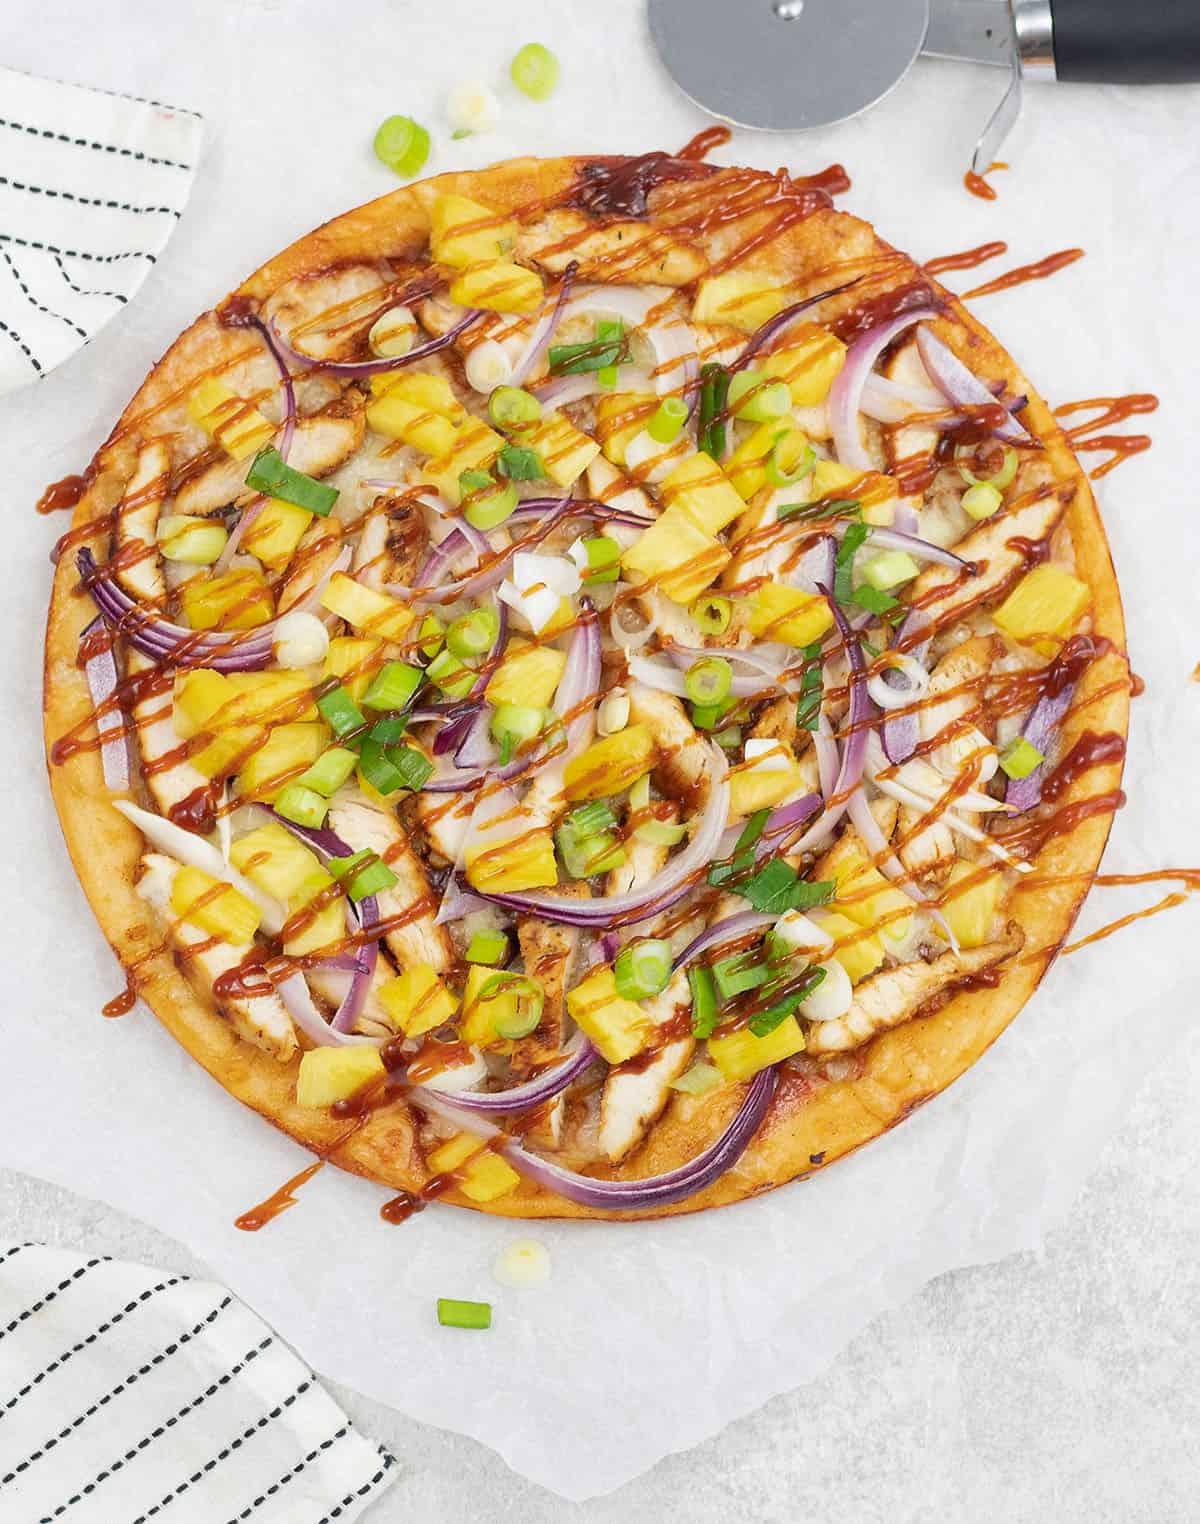 Sweet And Sour Chicken Pizza With BBQ Sauce